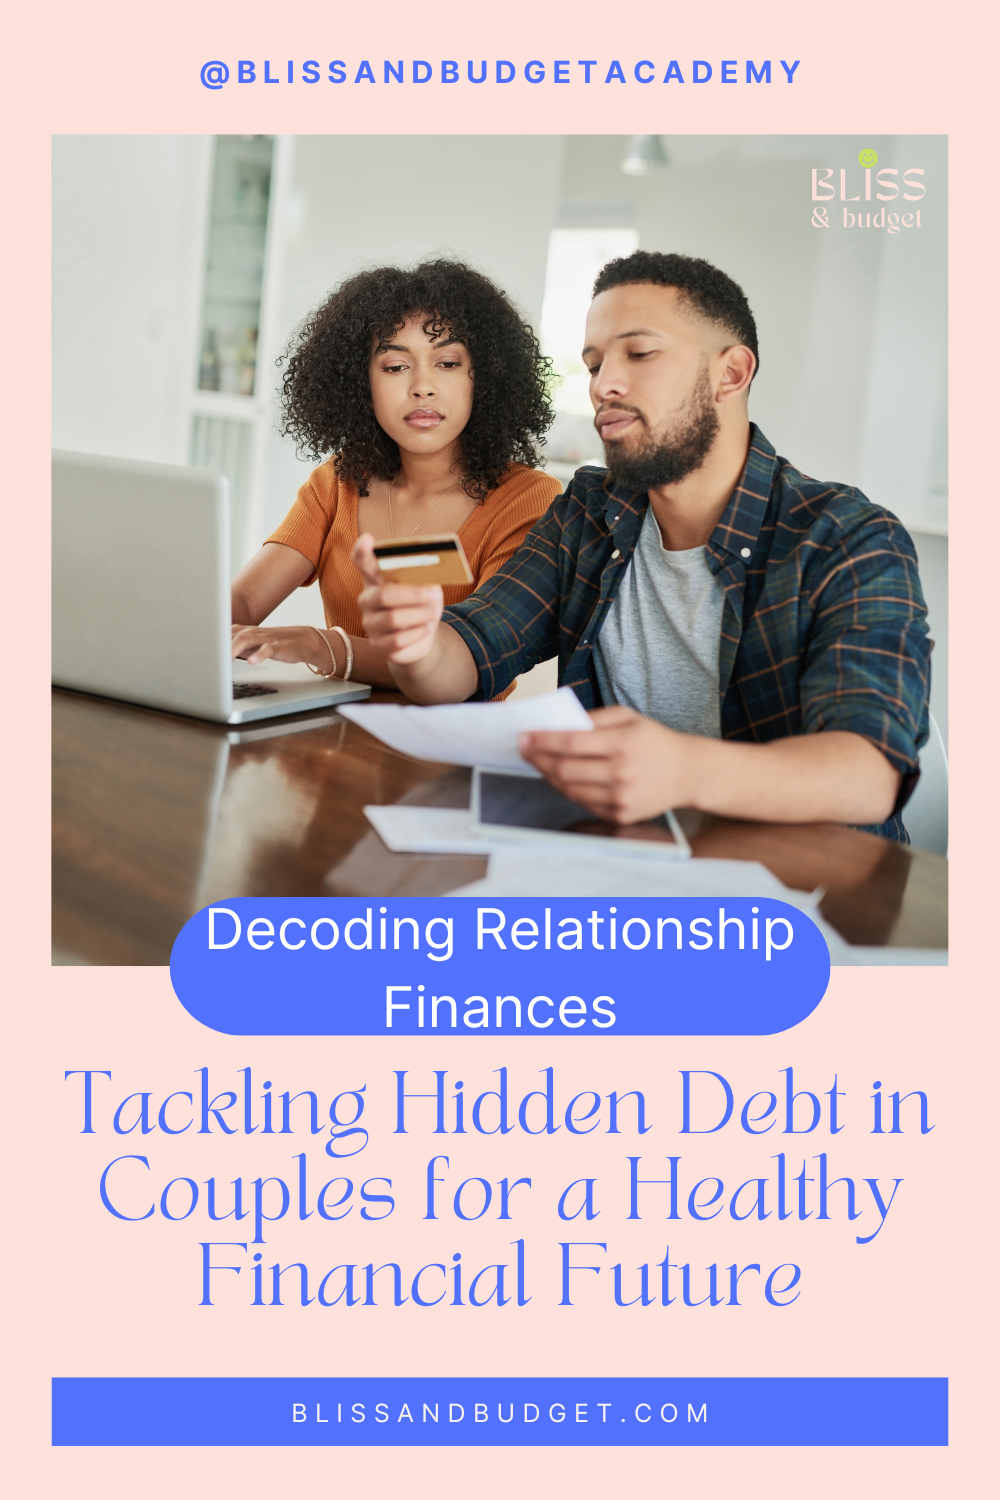 Bliss and Budget Decoding Relationship Finances Tackling Hidden Debt in Couples for a Healthy Financial Future